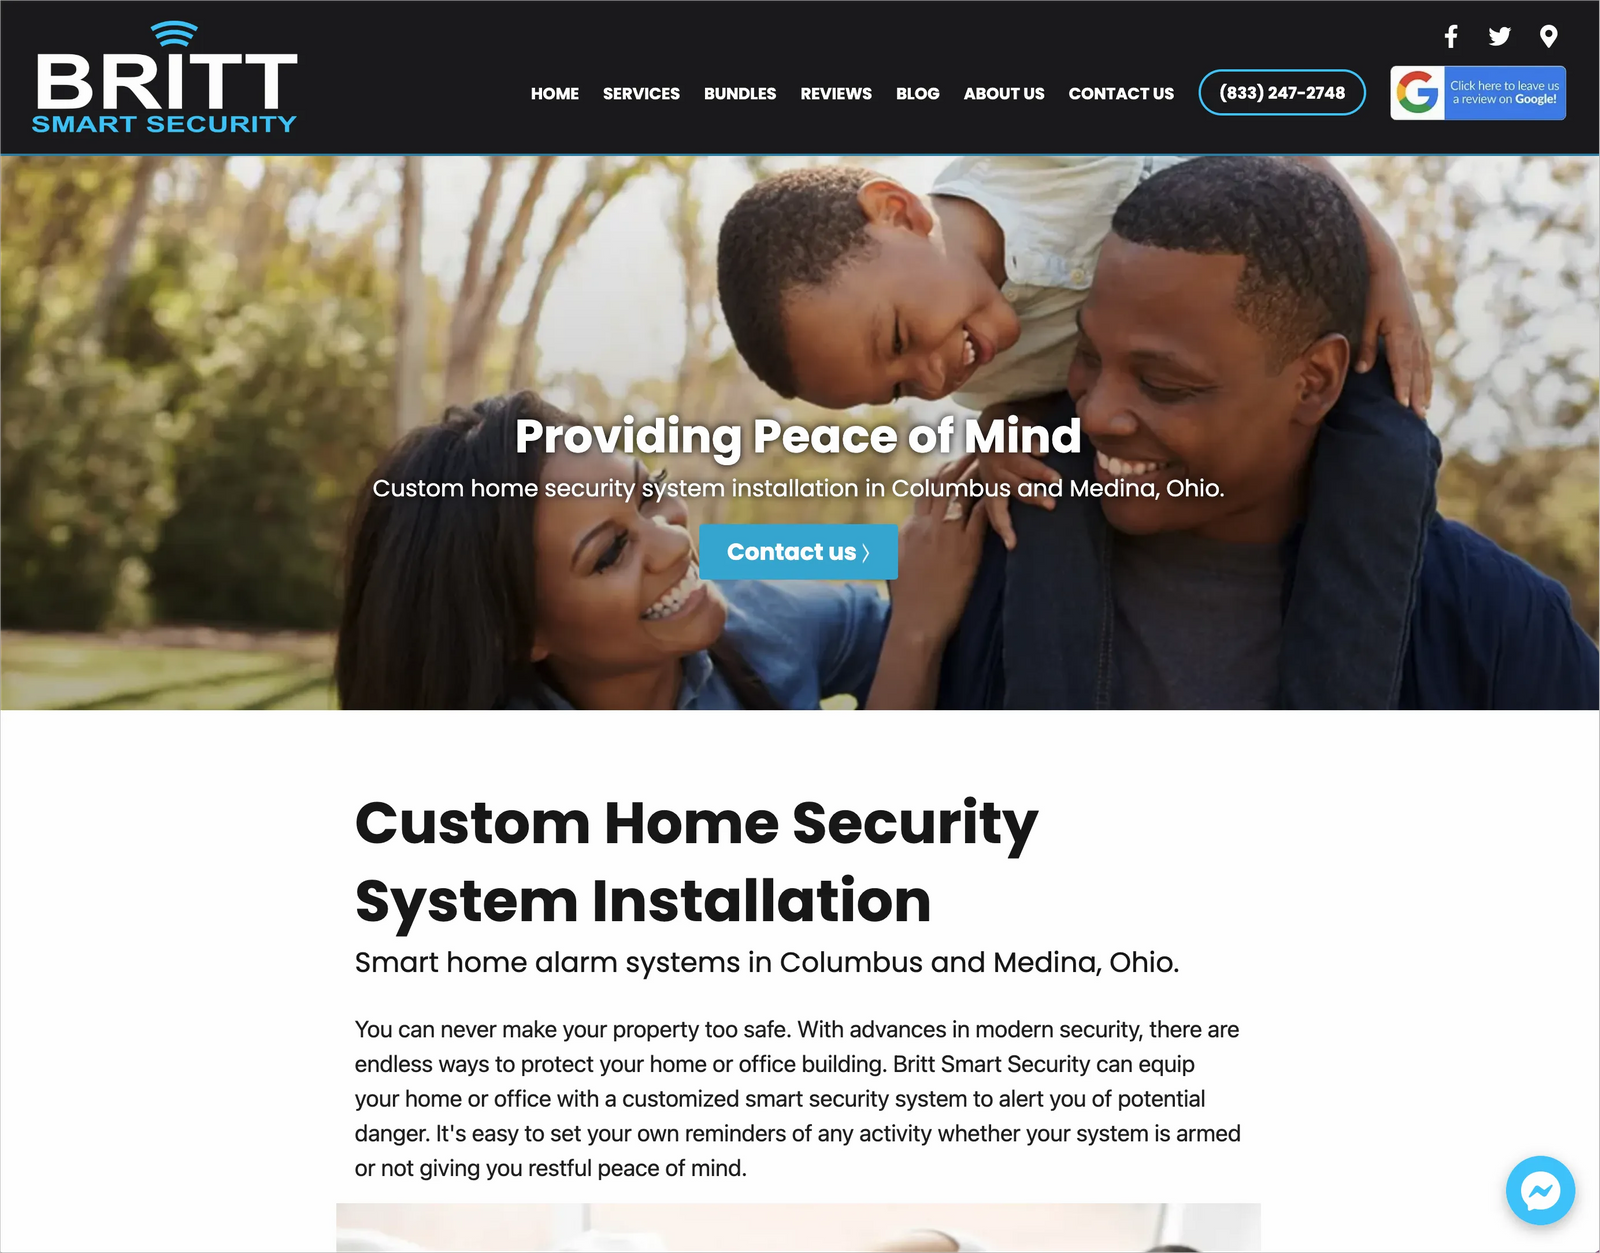 example of effective website services page showcasing a key benefit of "providing peace of mind"